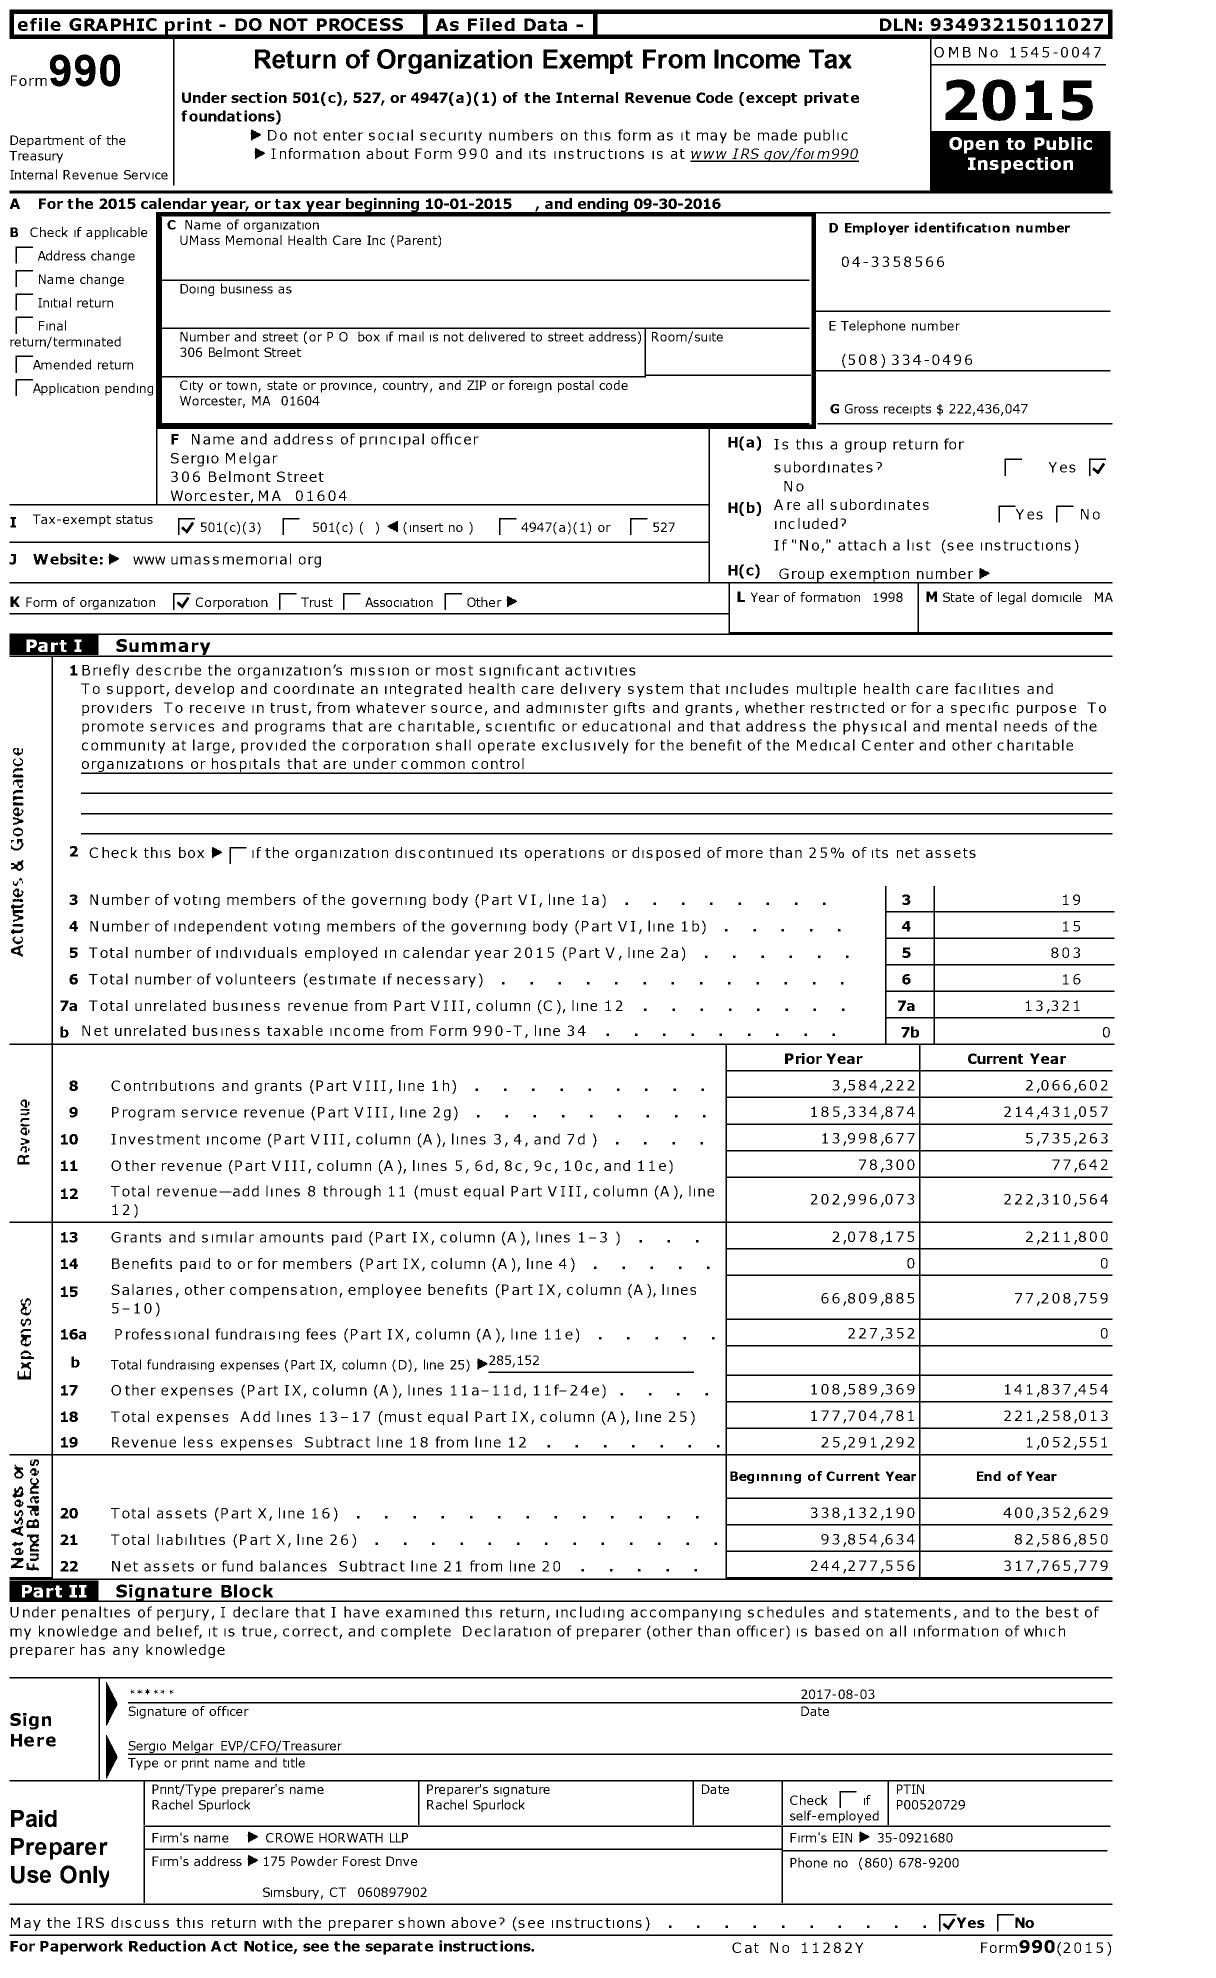 Image of first page of 2015 Form 990 for UMass Memorial Health Care (UMMHC)